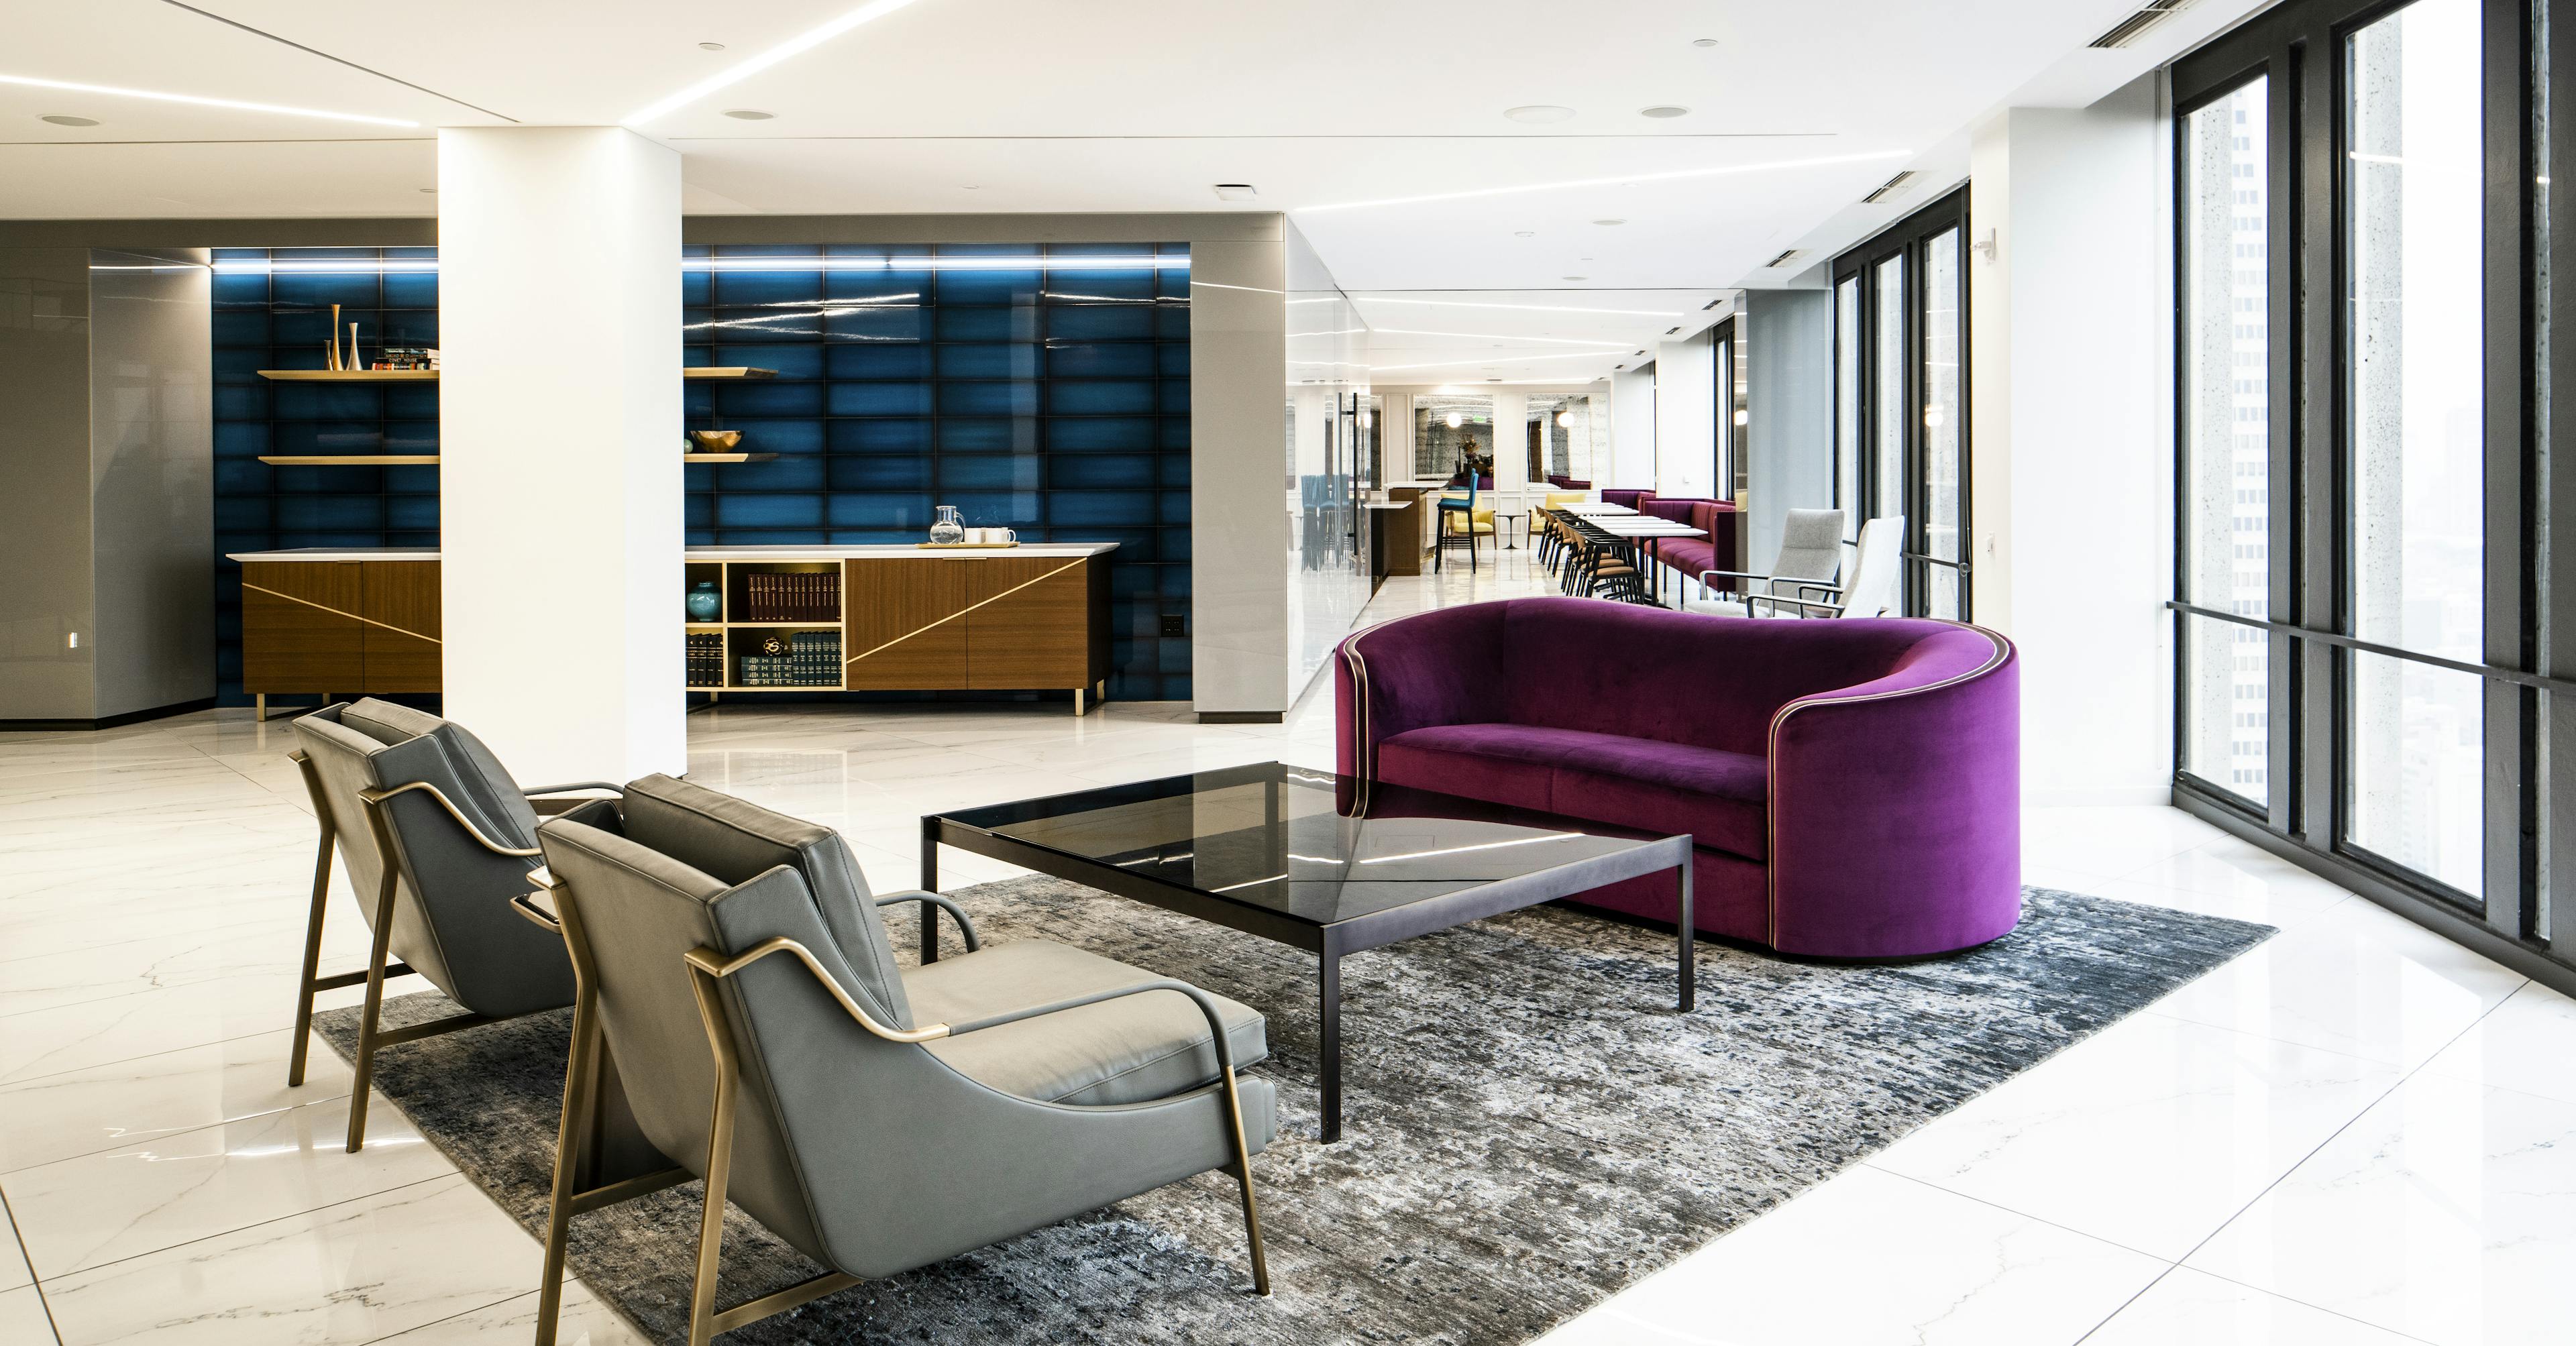 Interior shot of the seating area in Nixon Peabody's San Francisco office lobby, showing a purple couch, two grey chairs, and a glass coffee table, with a credenza in the background